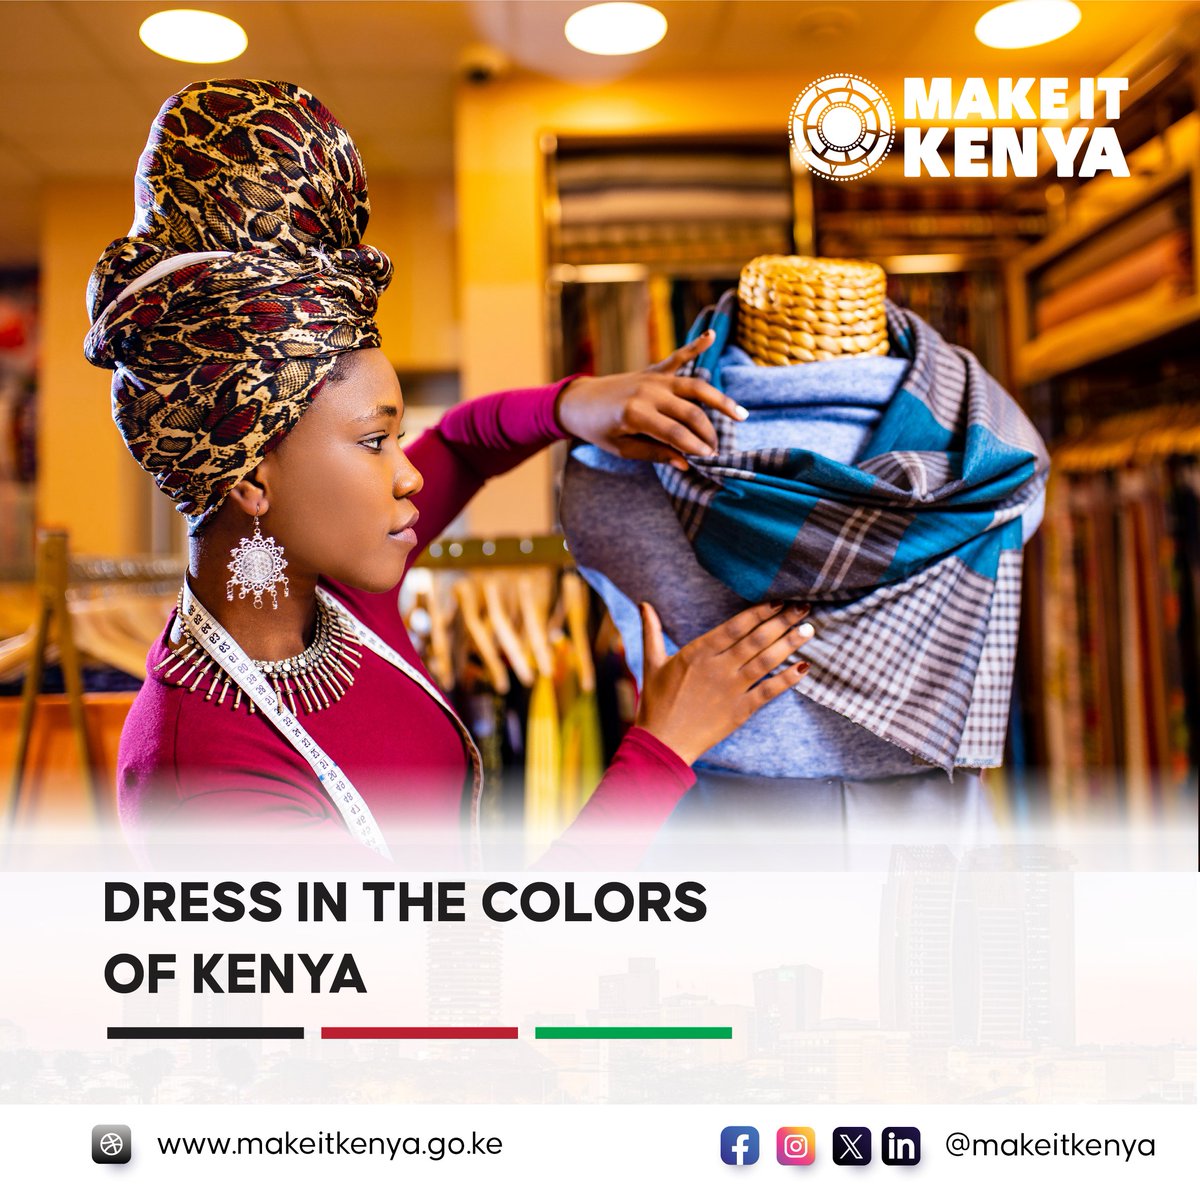 Wrap yourself in the colors of Kenya 🇰🇪 Our textiles, rich in bold patterns and luxuriously soft textures, reflect the rich culture and artistry of our nation. #KenyanTextile